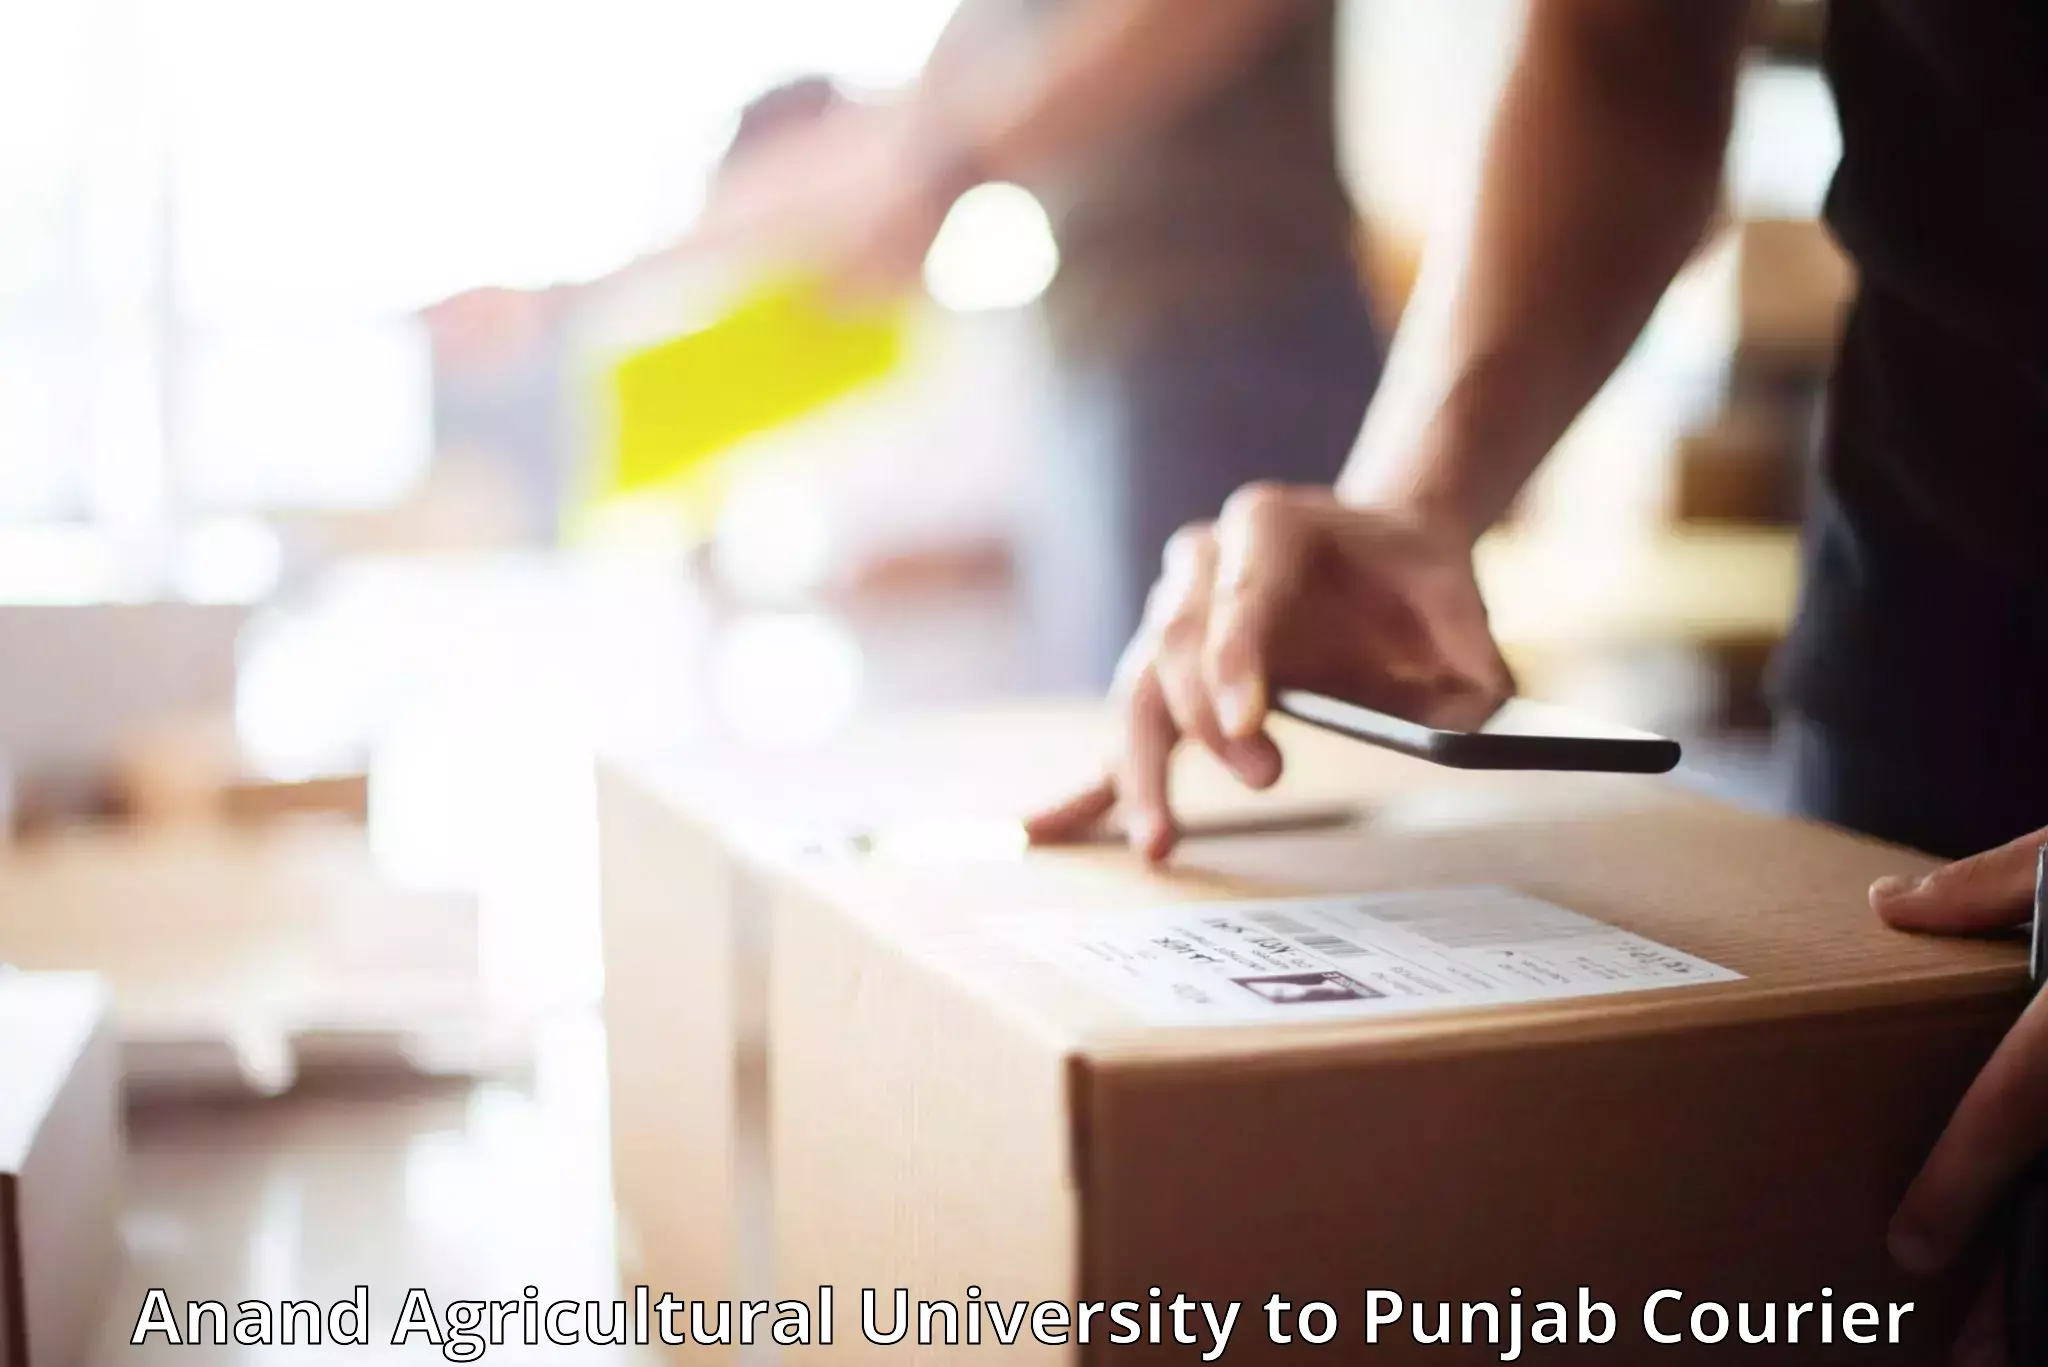 Corporate baggage transport in Anand Agricultural University to Punjab